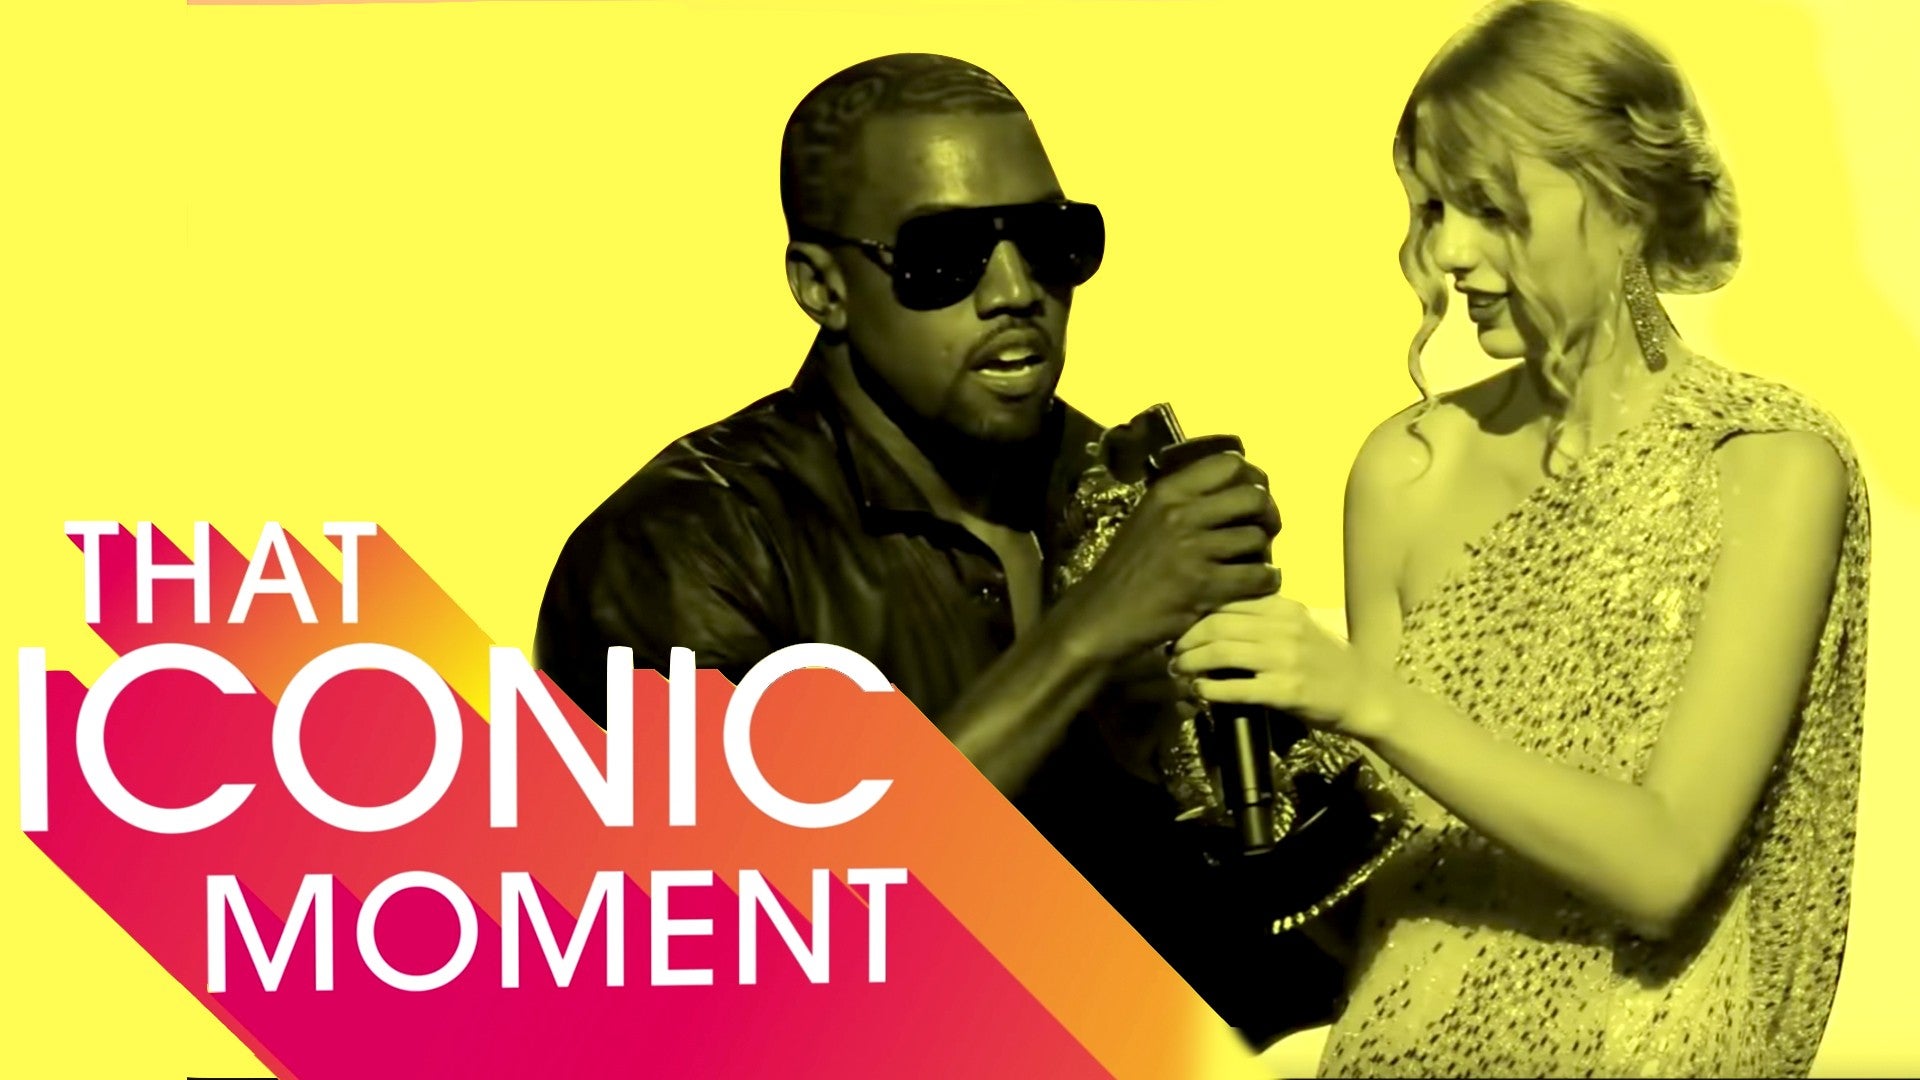 Taylor Swift Vs Kanye West The Complete Timeline Of Their